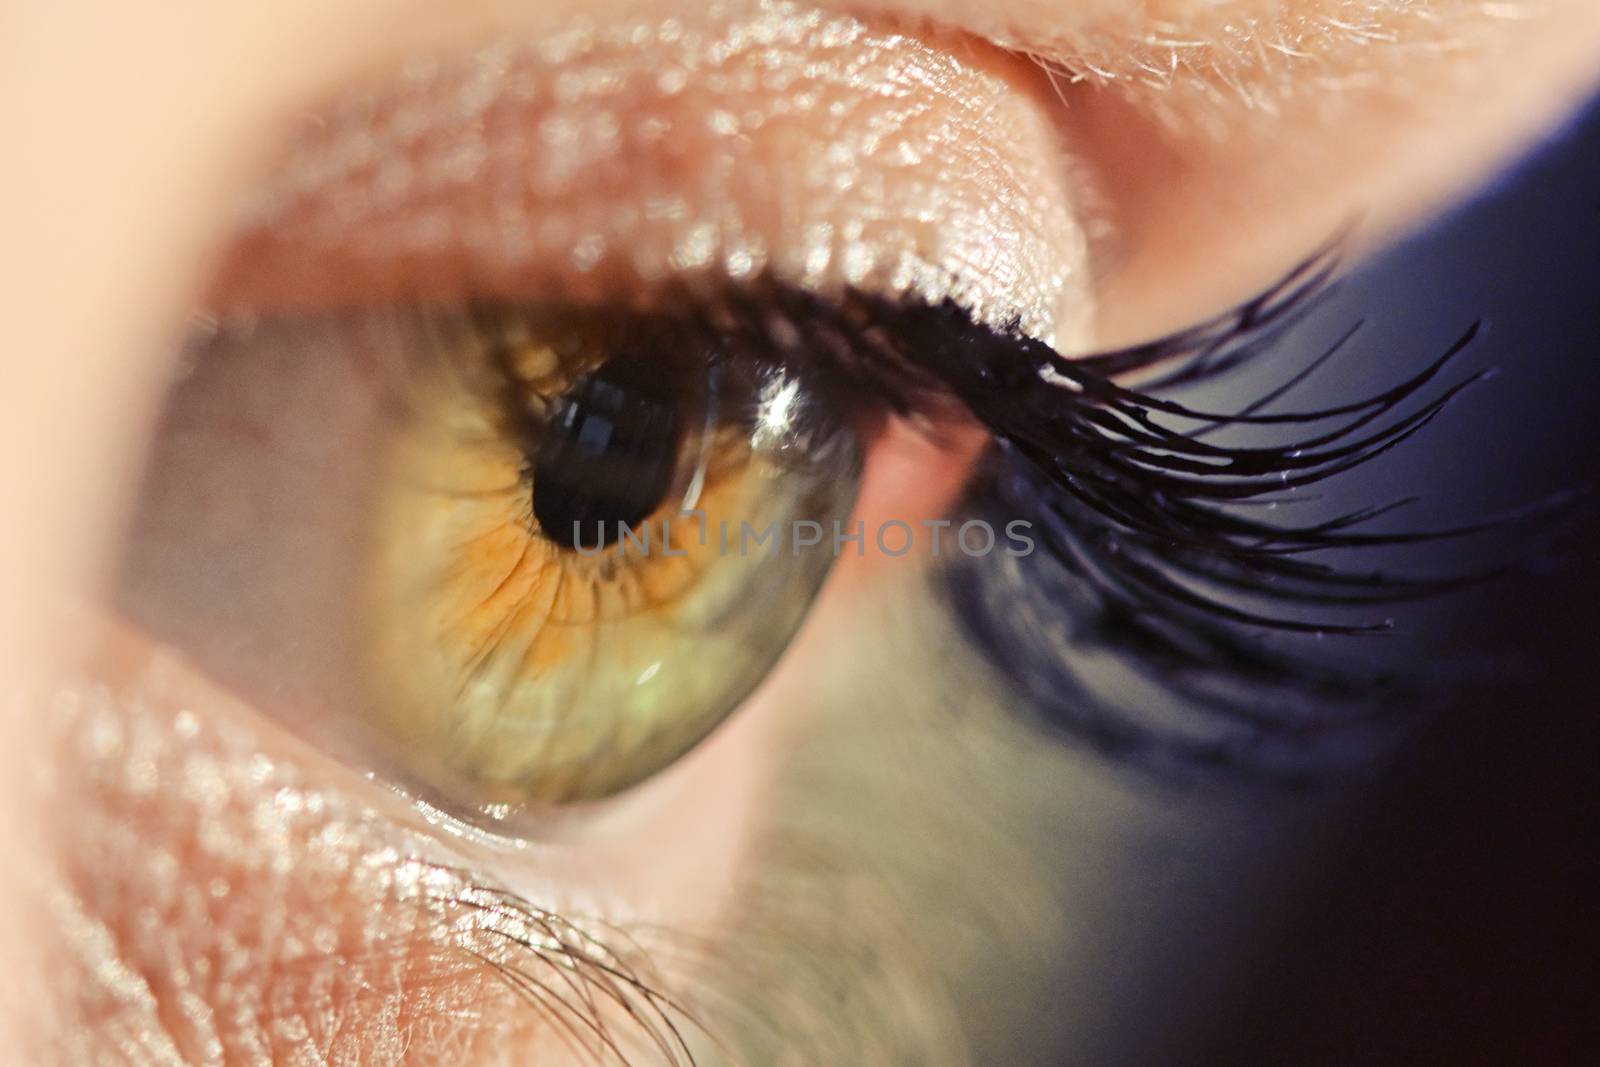 Details of Human Eye Macro View by mady70